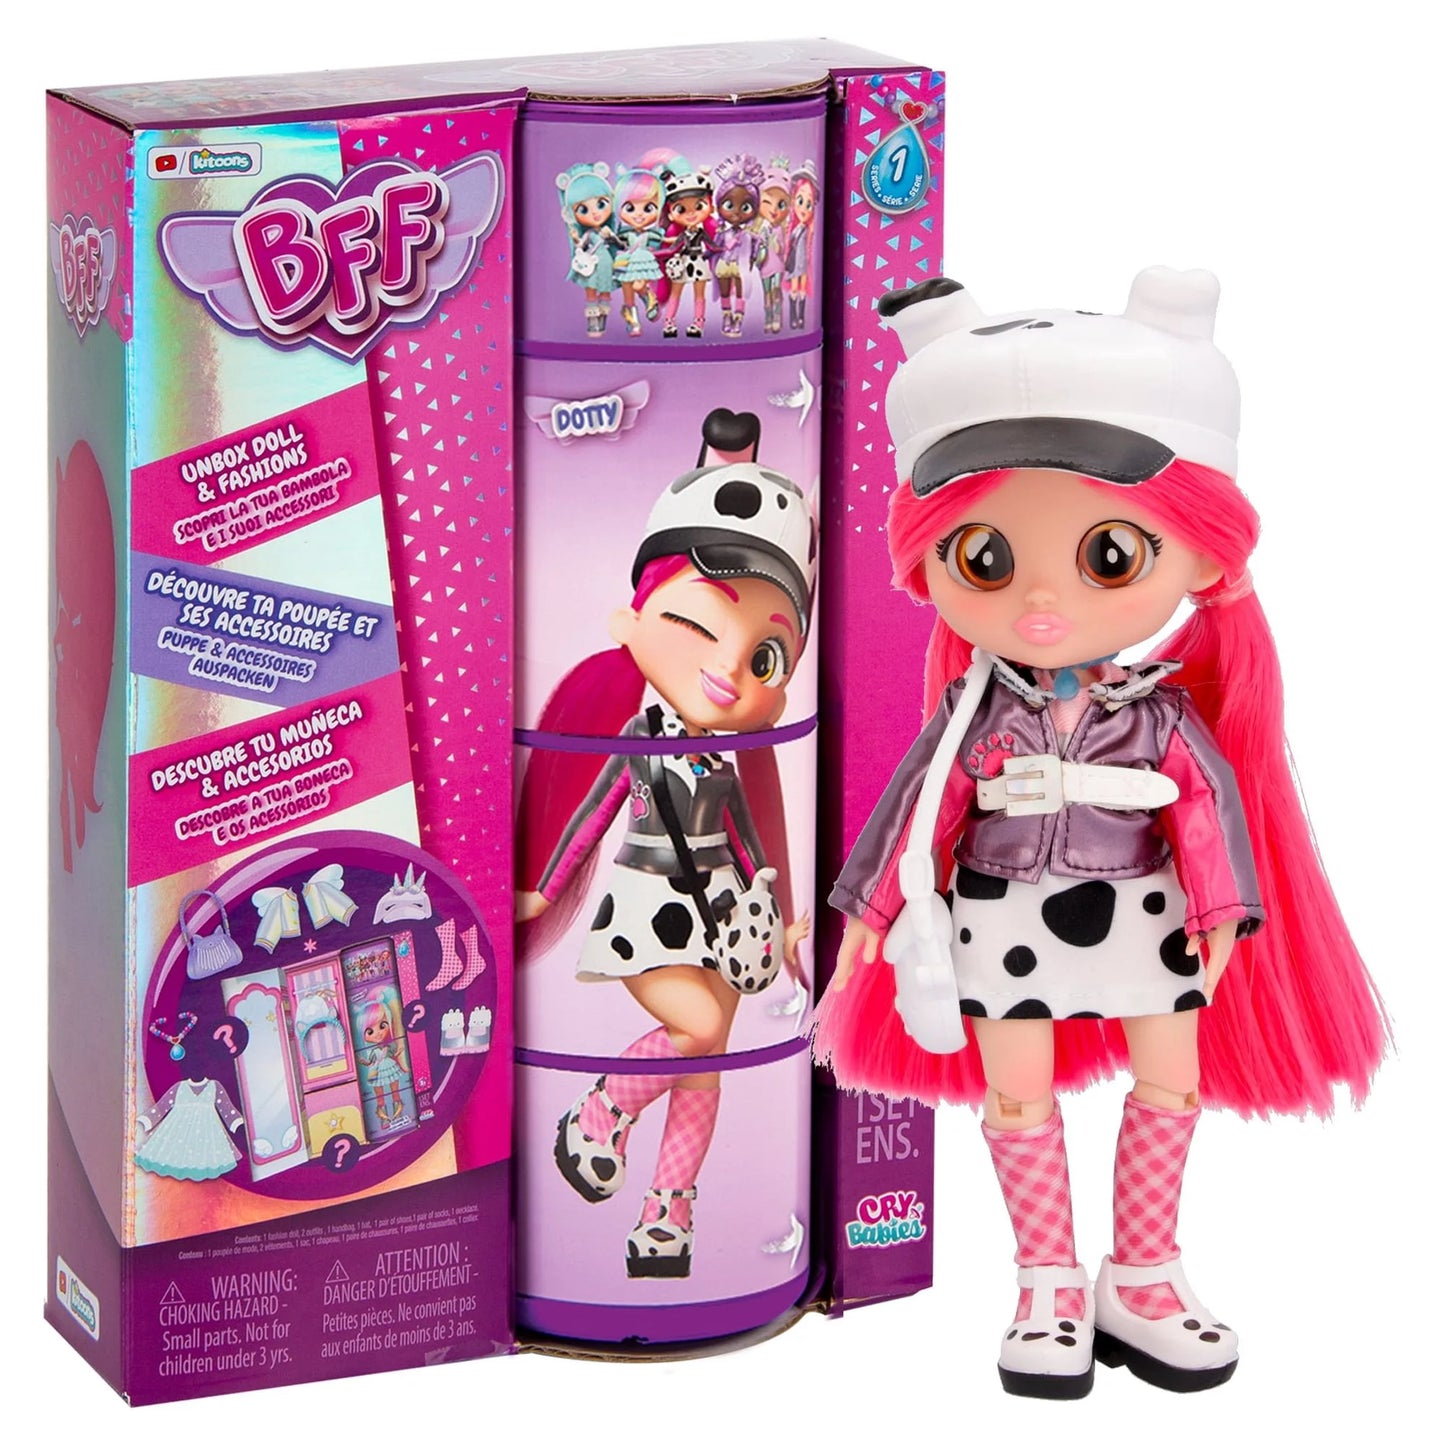 BFF by Cry Babies Dotty 8 inch Fashion Doll for Girls Ages 4+ Years